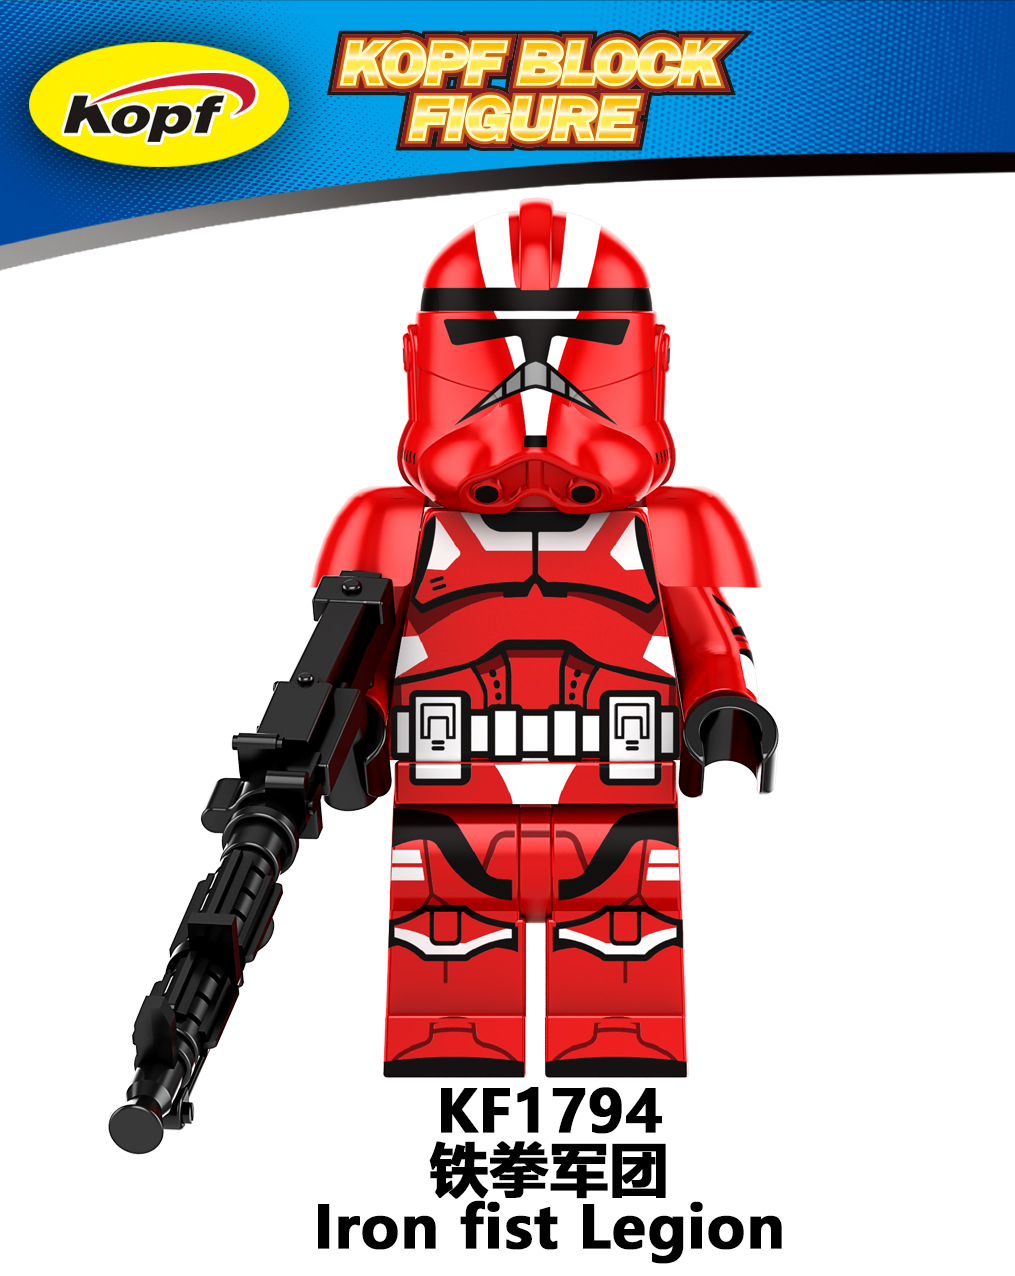 KF6170 KF1788 KF1789 KF1790 KF1791 KF1792 KF1793 KF1794 KF1795 Star Wars Mini Building Blocks R2-D2 Drabatan Hot Toys Sith Soldiers Action Figures Educational Toys For Kids Gifts 